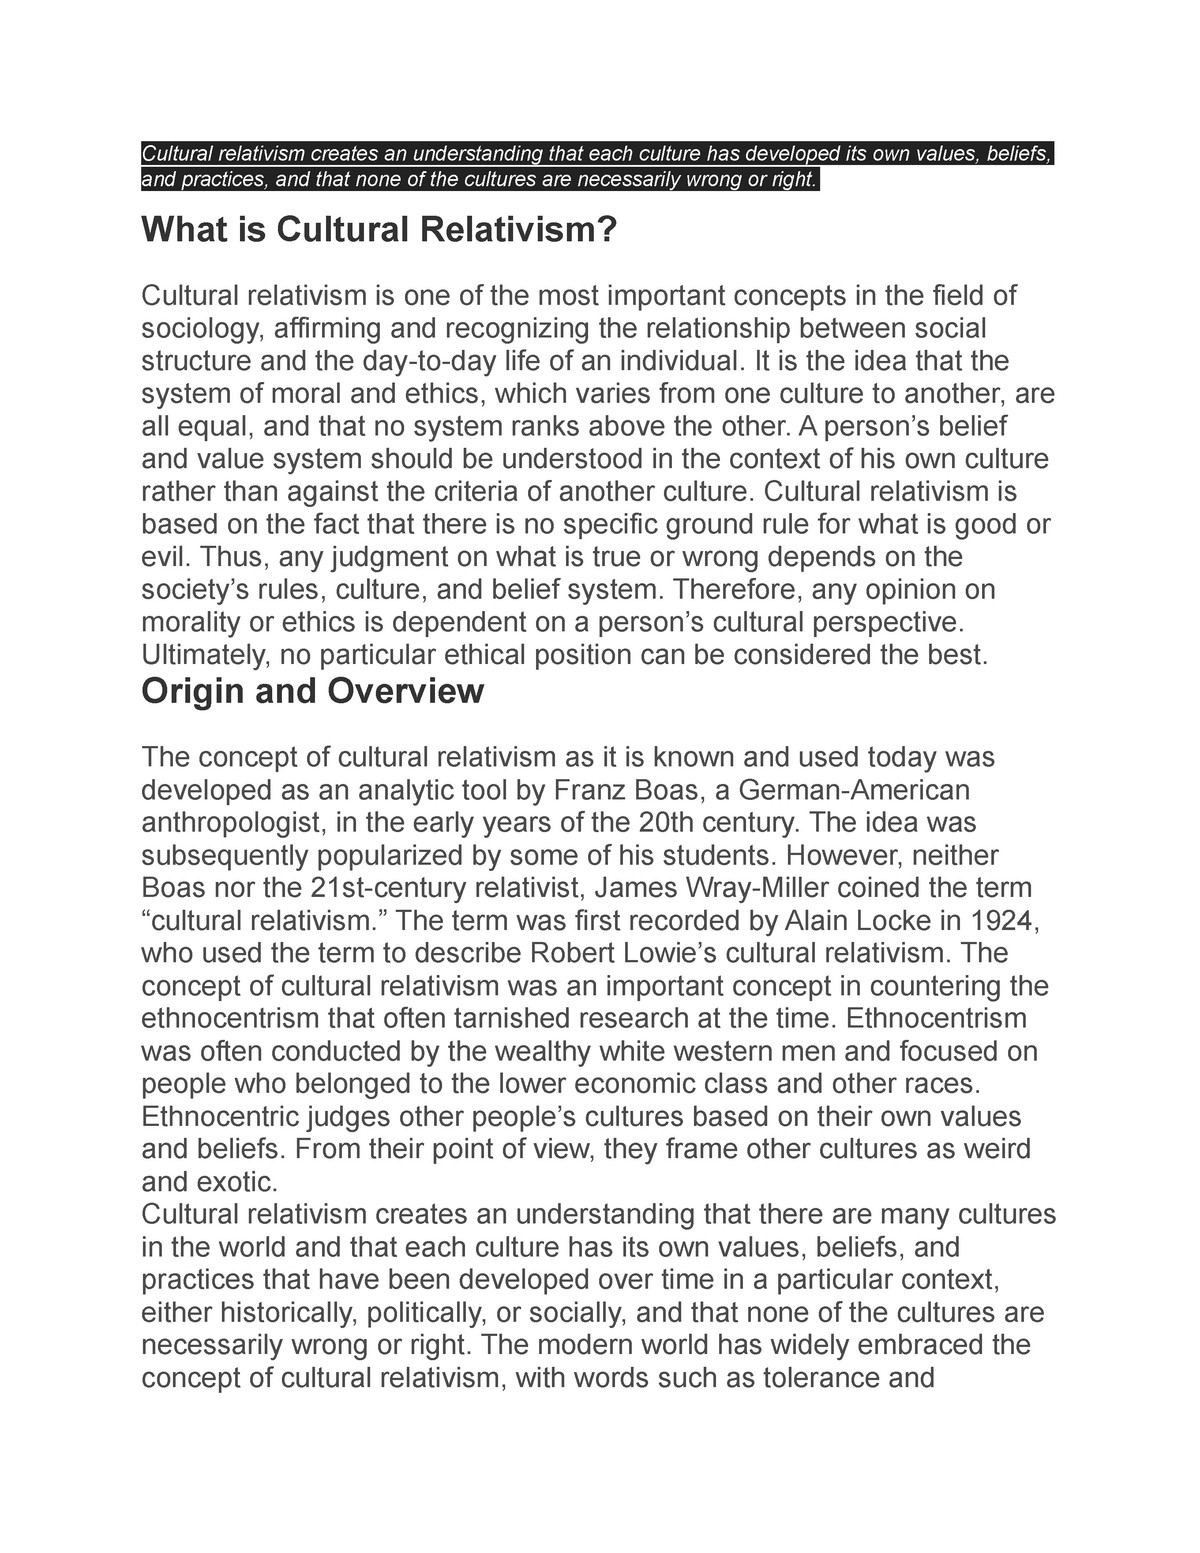 essay about understanding cultural relativism in our society